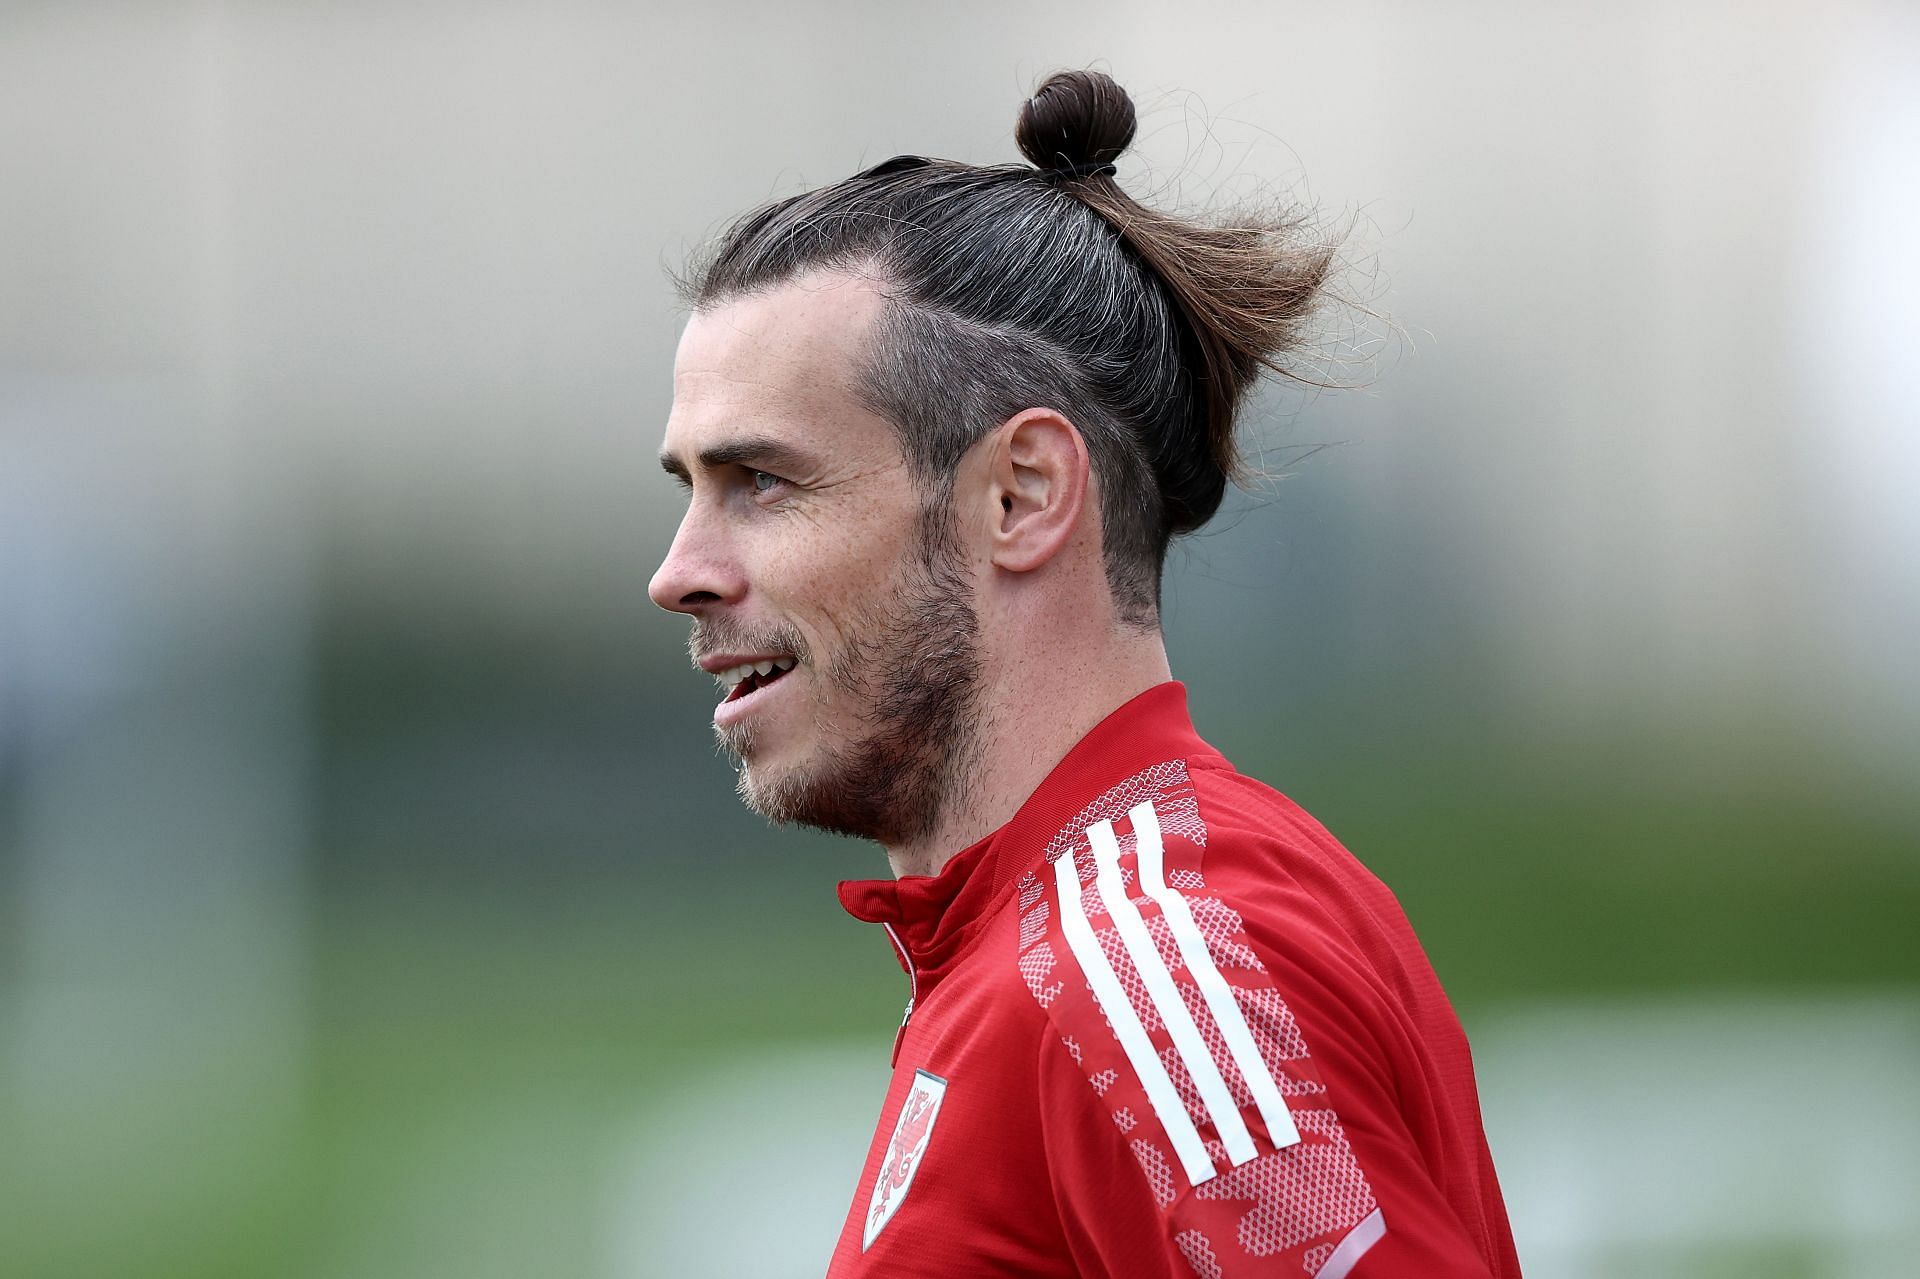 Gareth Bale has only made three appearances this season